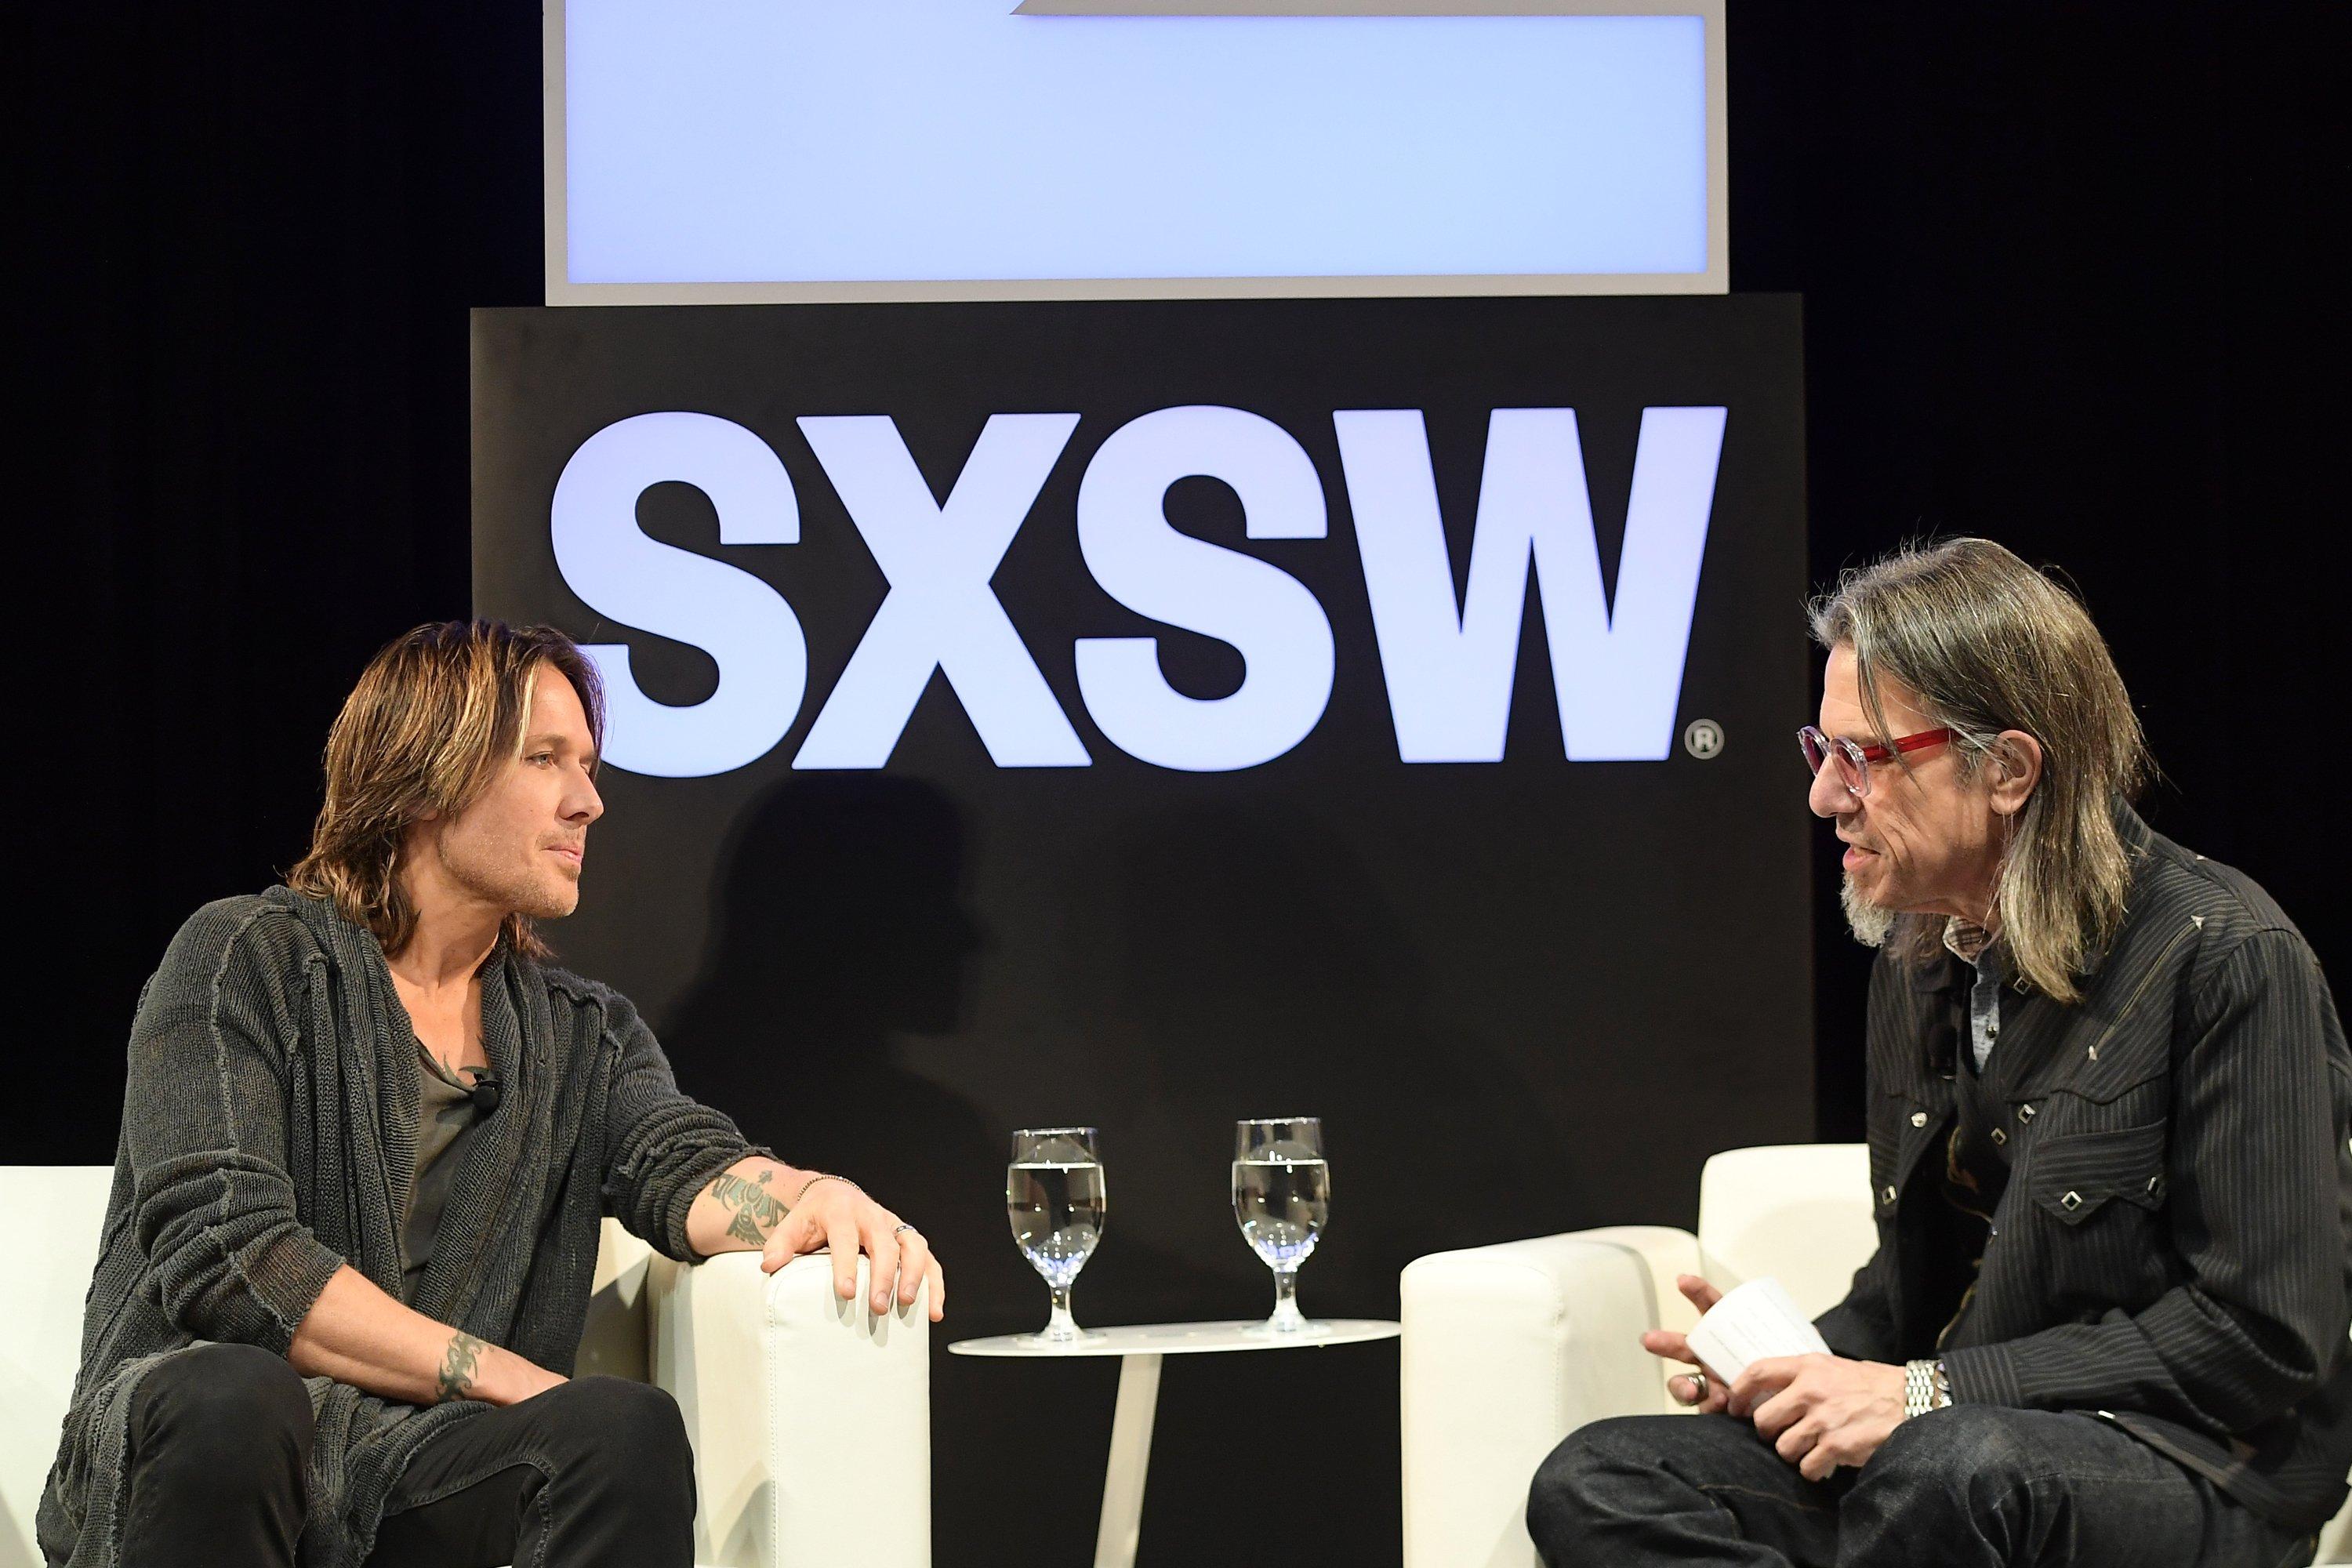 Keith Urban and Scott Goldman photographed at SXSW 2018